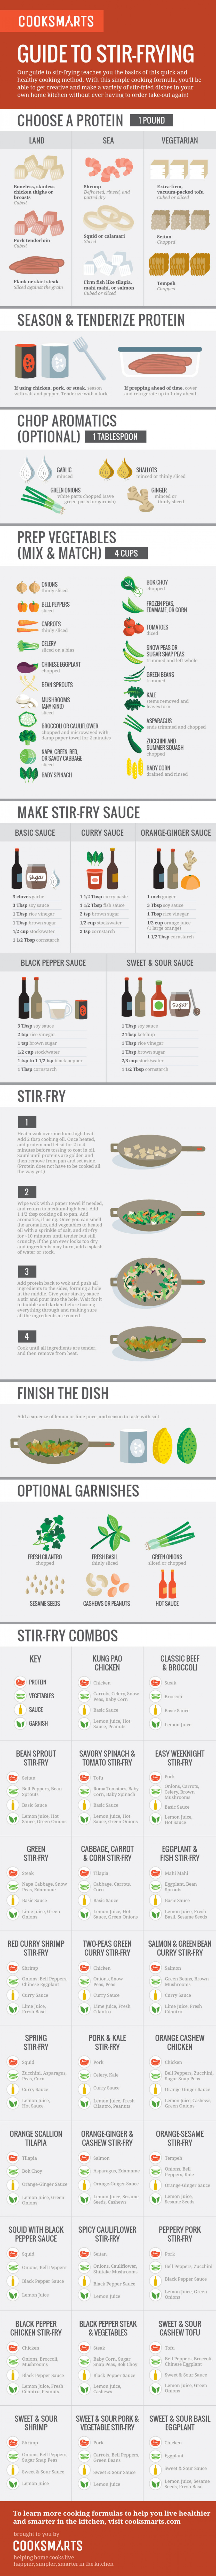 Guide to Stir-Frying Infographic